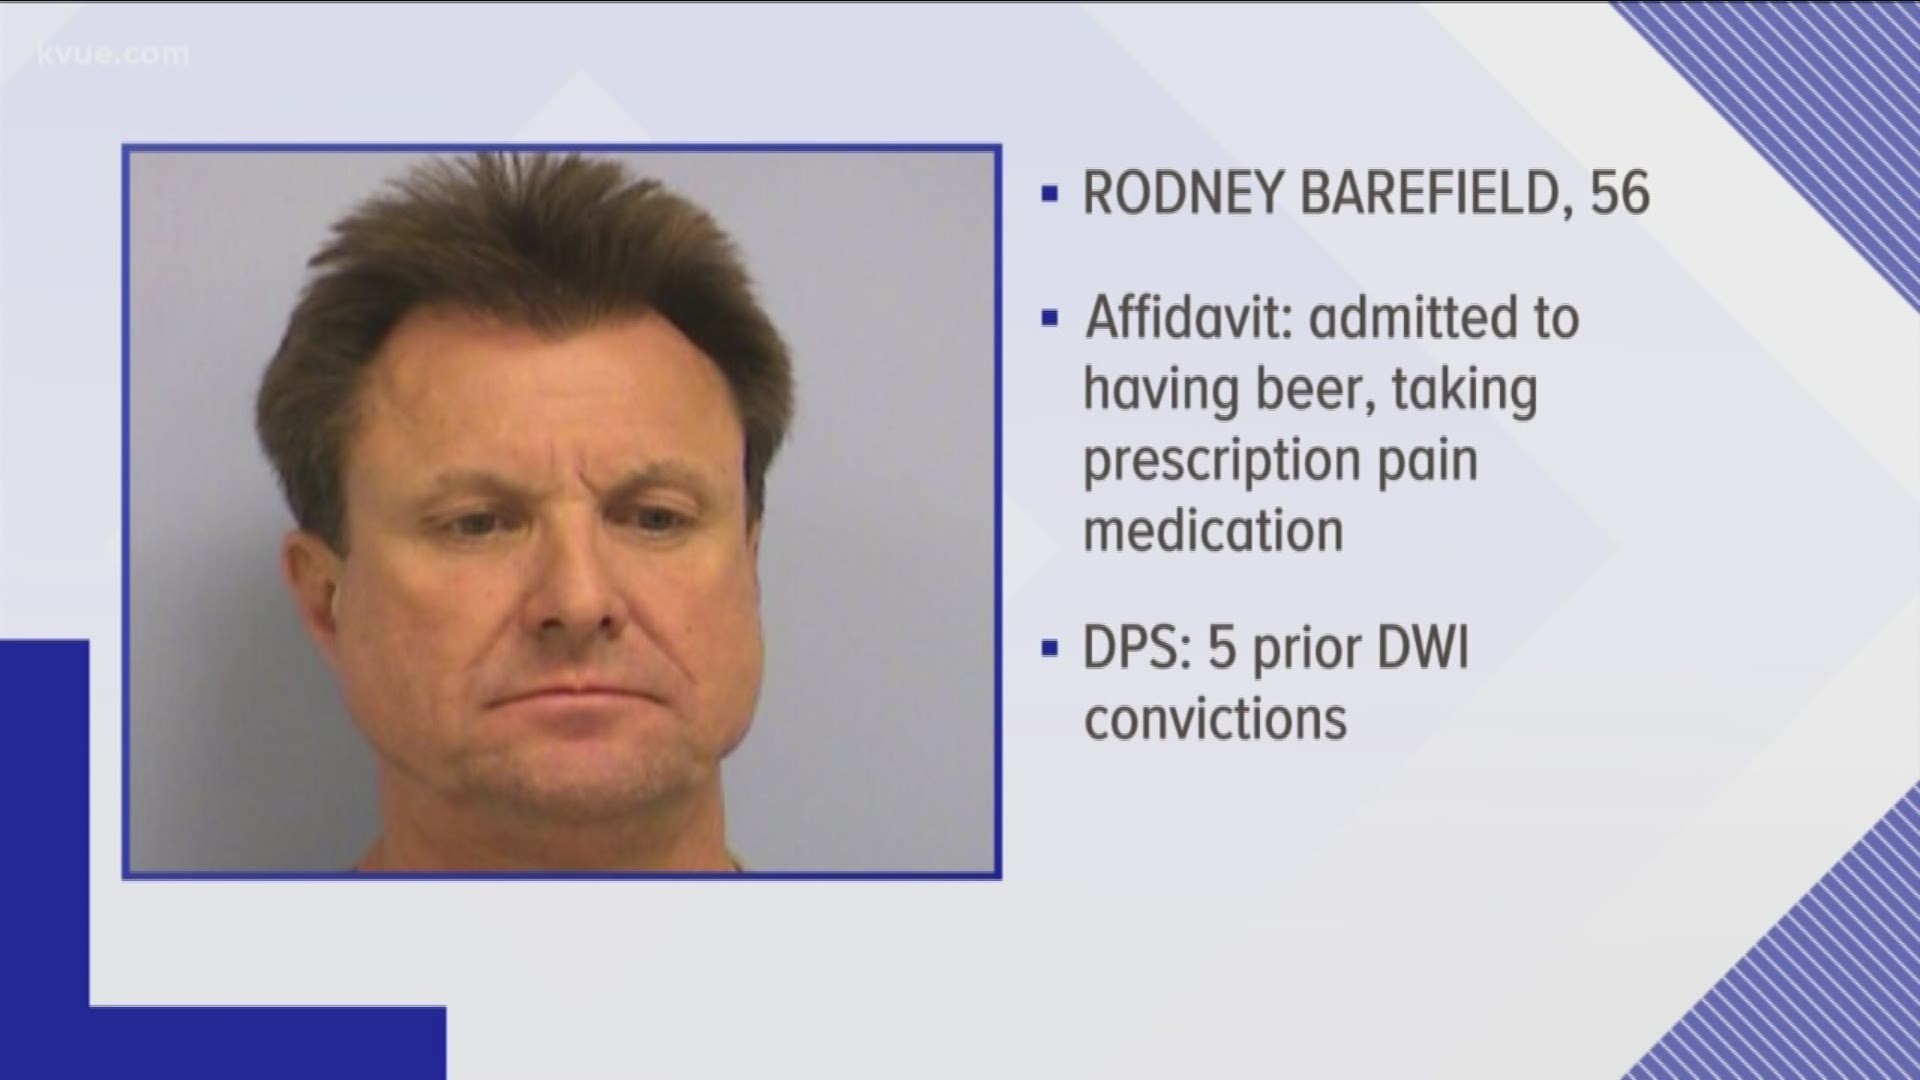 Records show the suspected drunk boater has a history of driving while intoxicated.